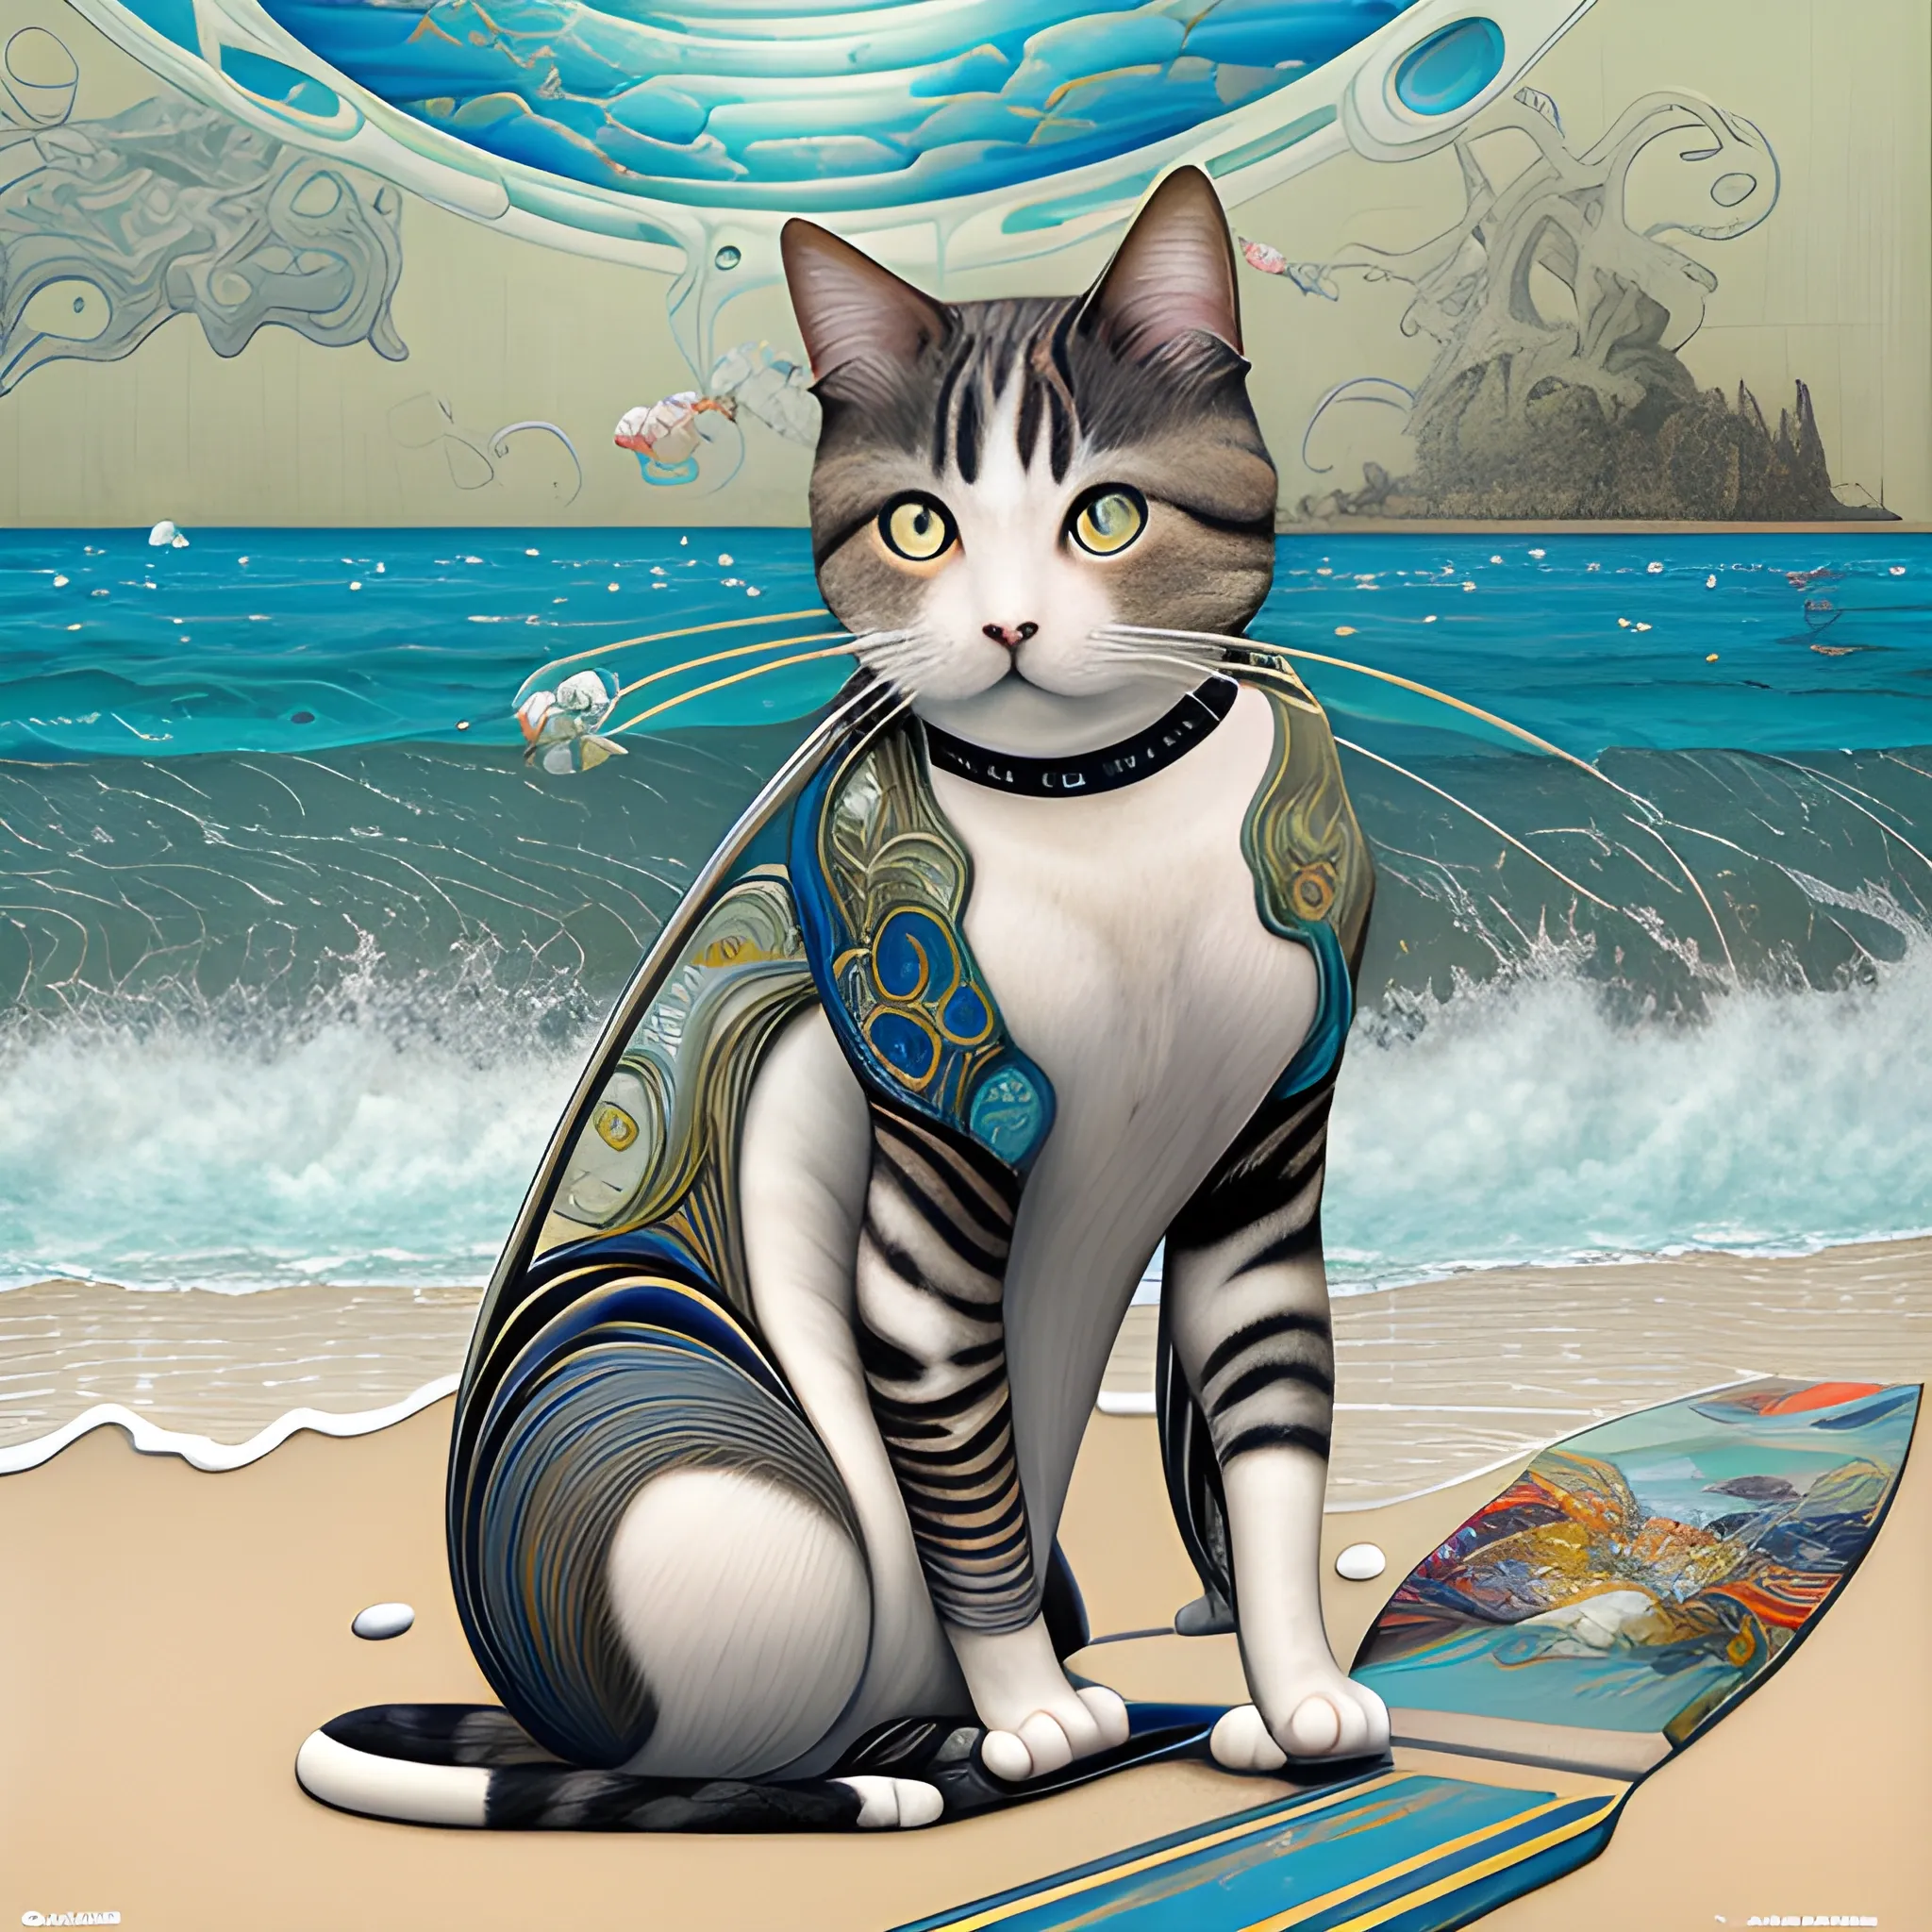 Art Nouveau art and Manabu Ikeda inspired painting of a cat playing on a beach. True aesthetics, cinematic, sharpened, detailed.